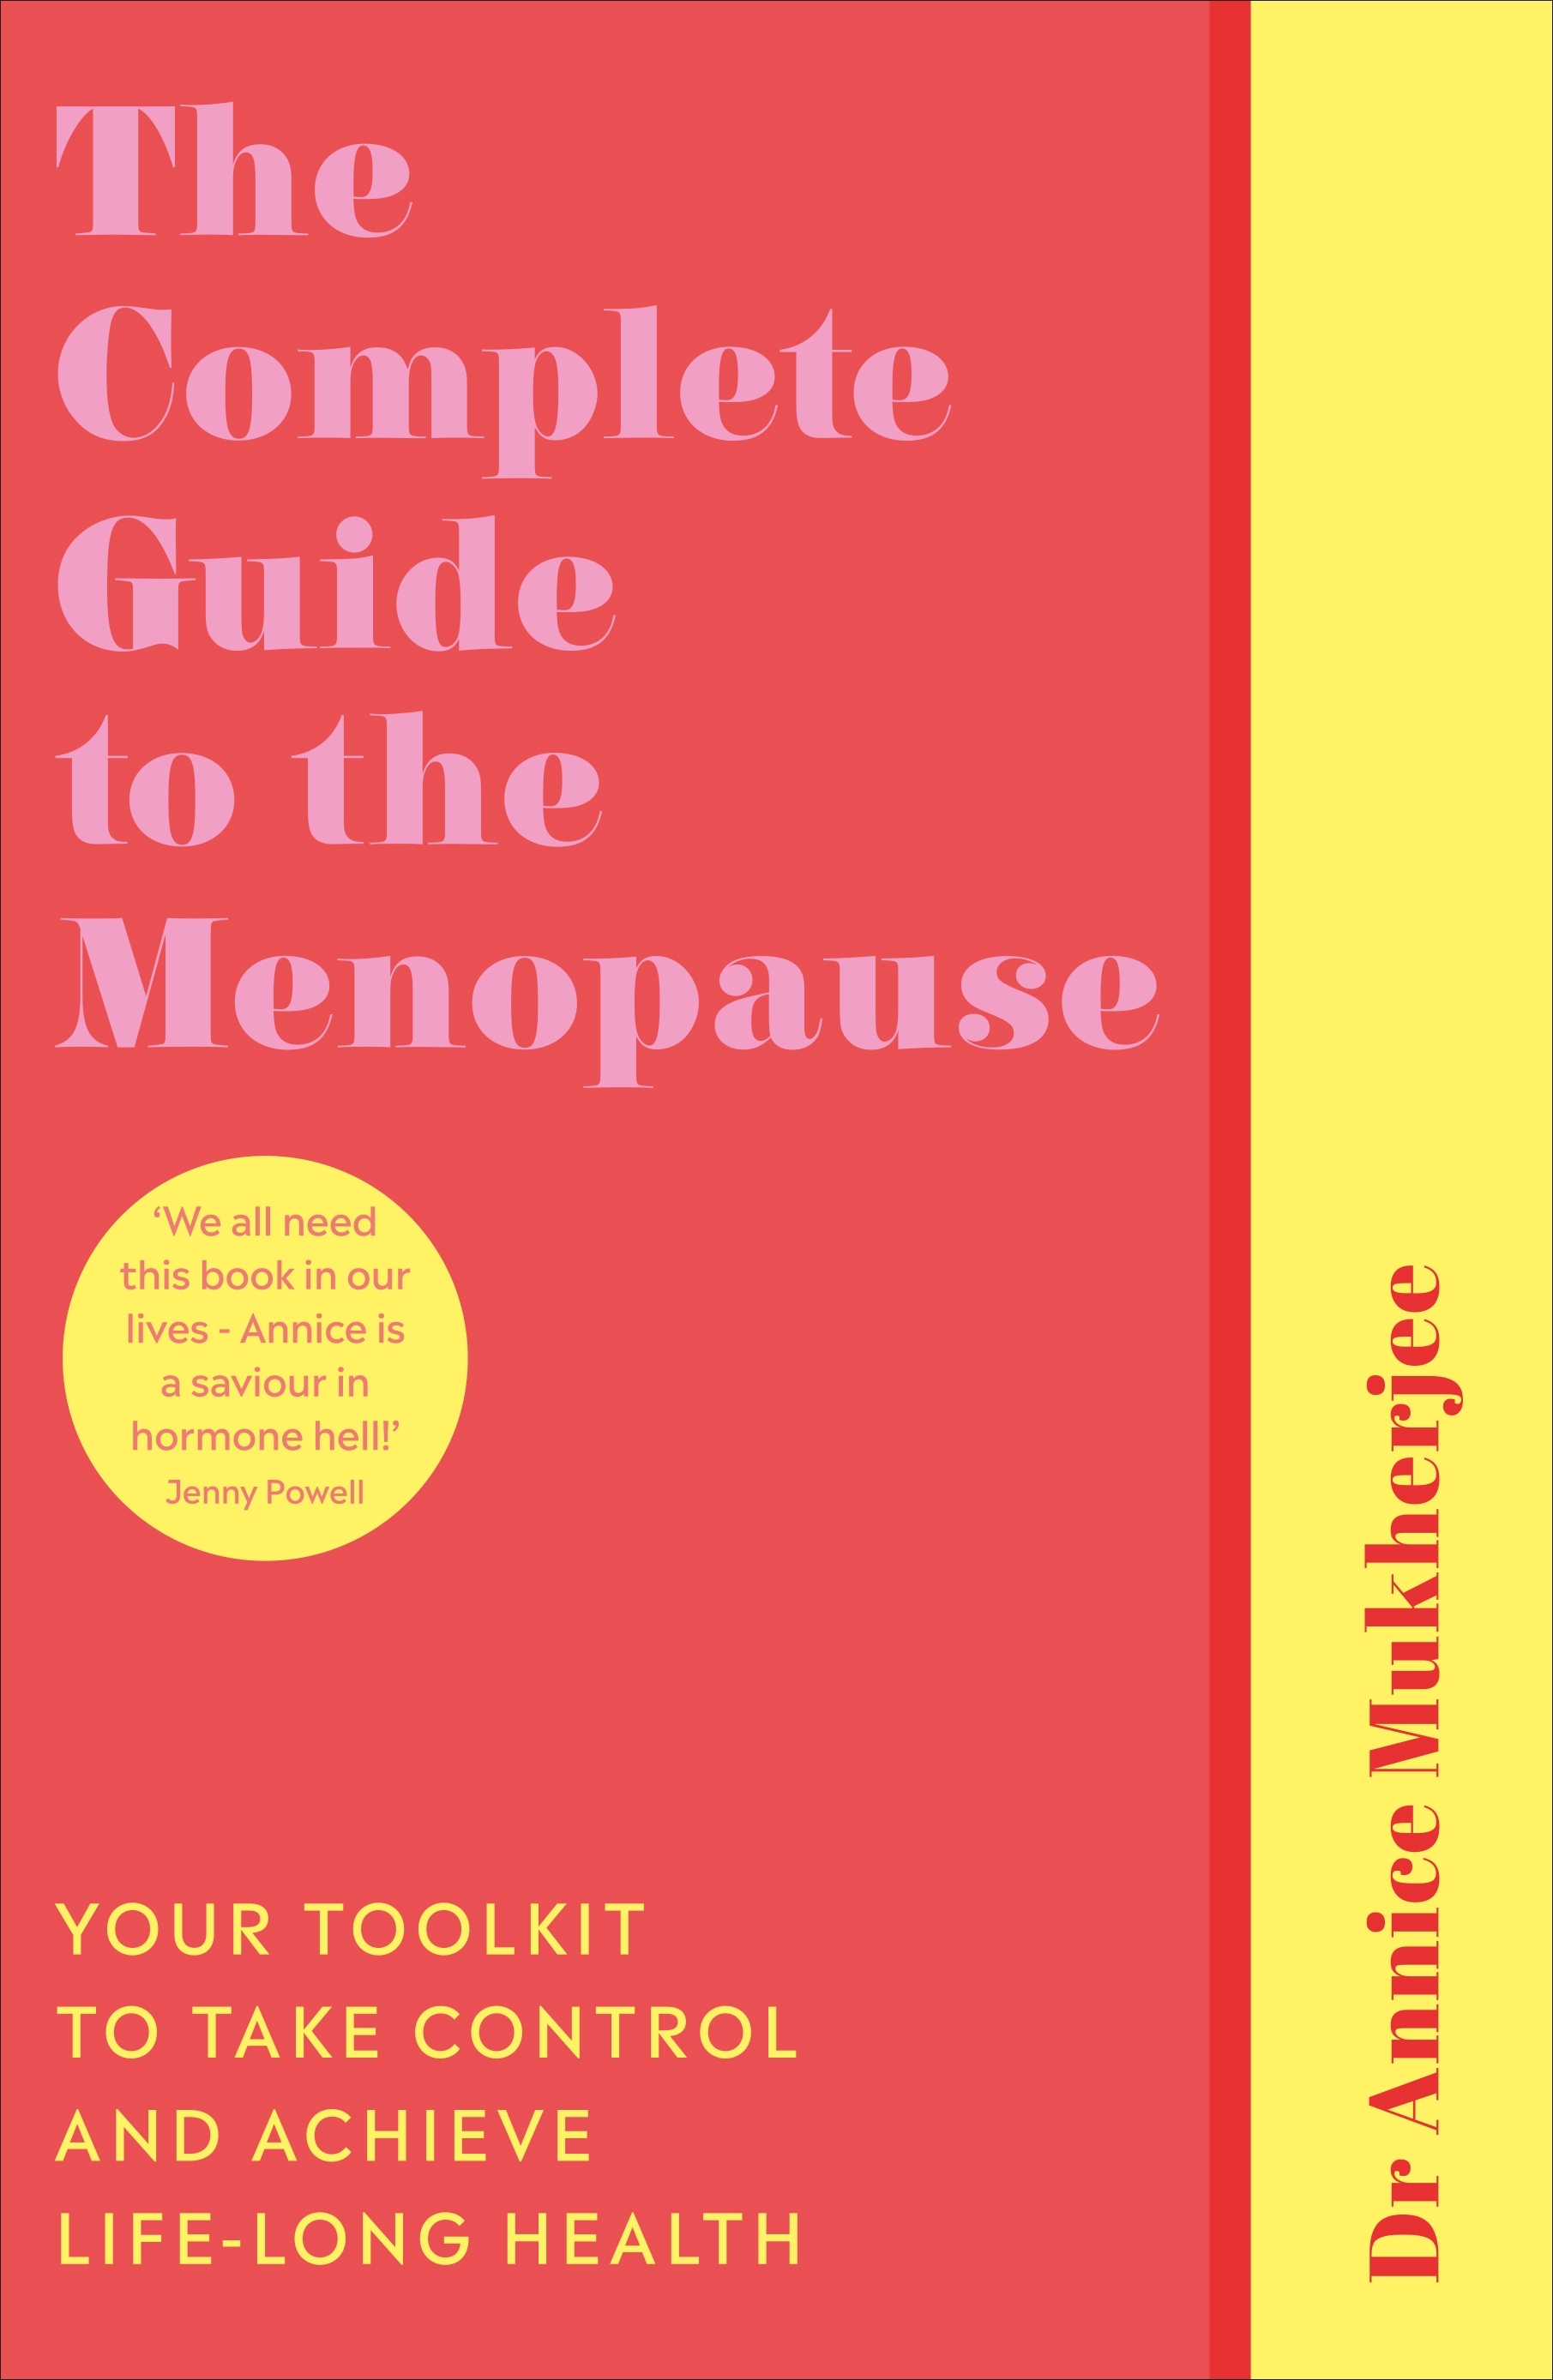 The Complete Guide To The Menopause By Annice Mukherjee Penguin Books Australia 1347